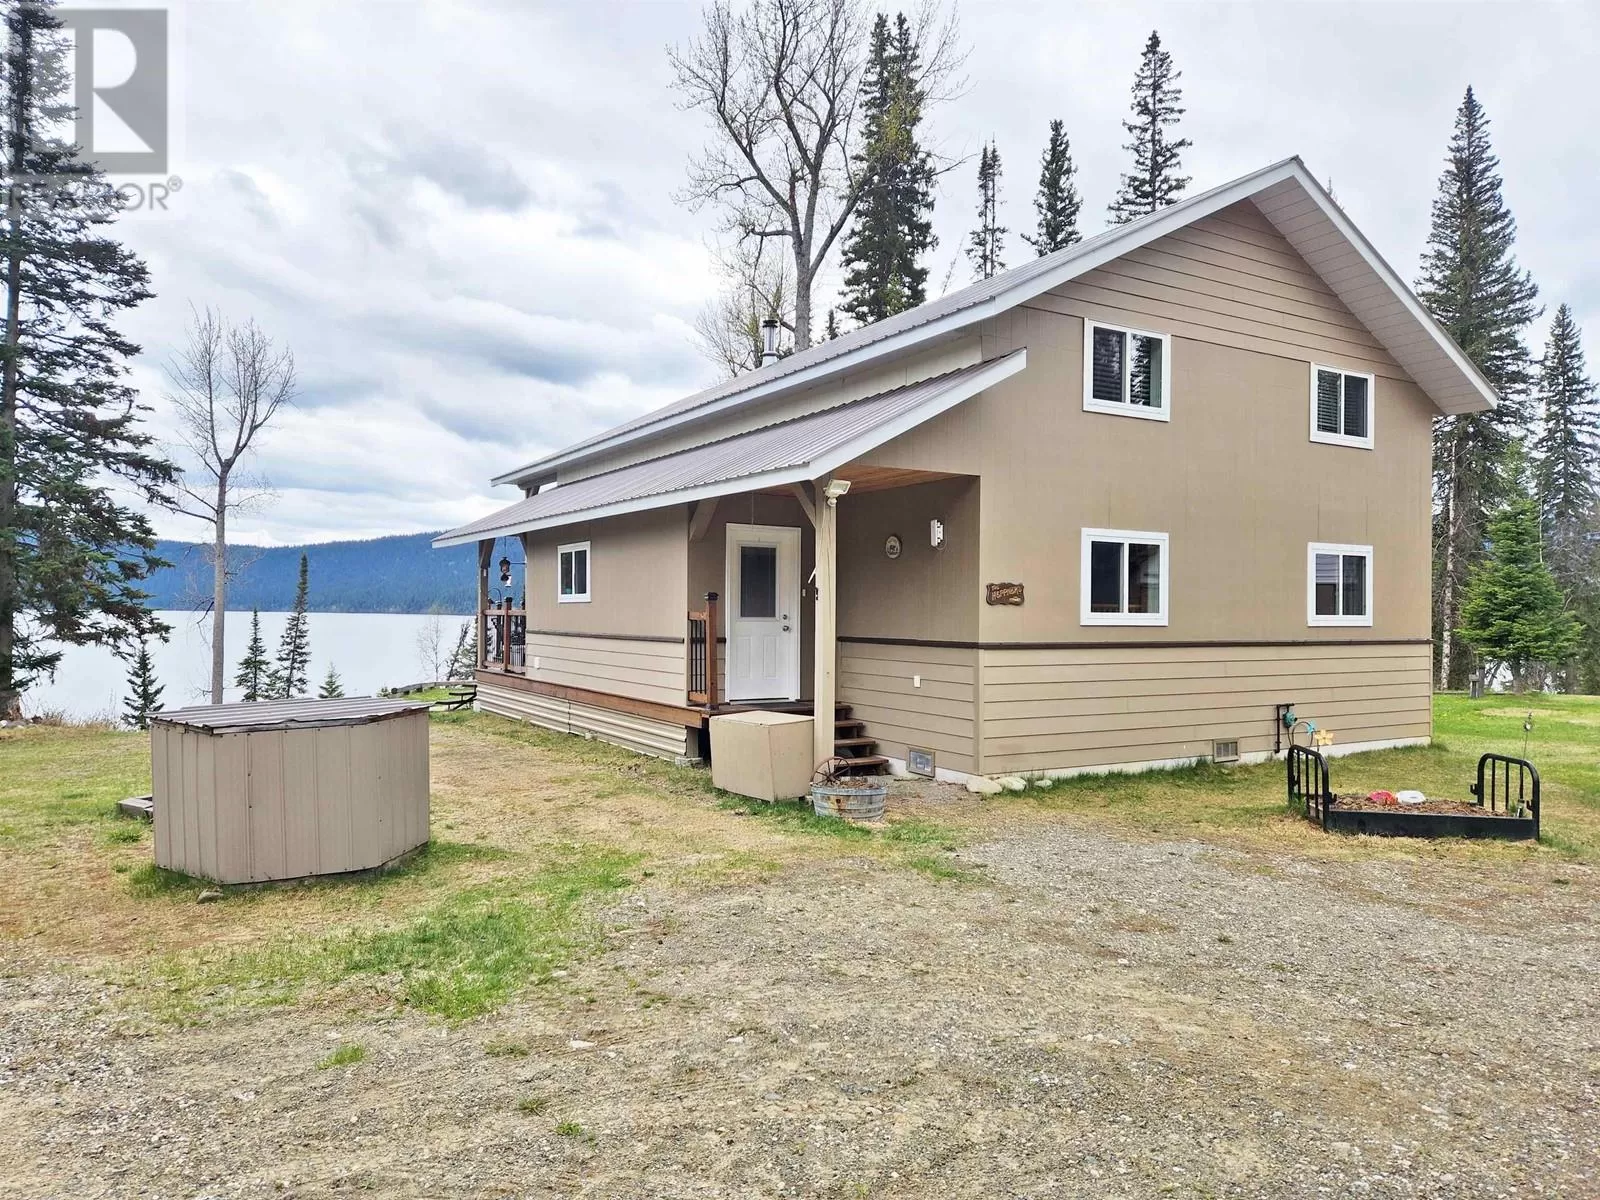 House for rent: 7132 Bowron Lake Road, Quesnel, British Columbia V0K 2R0